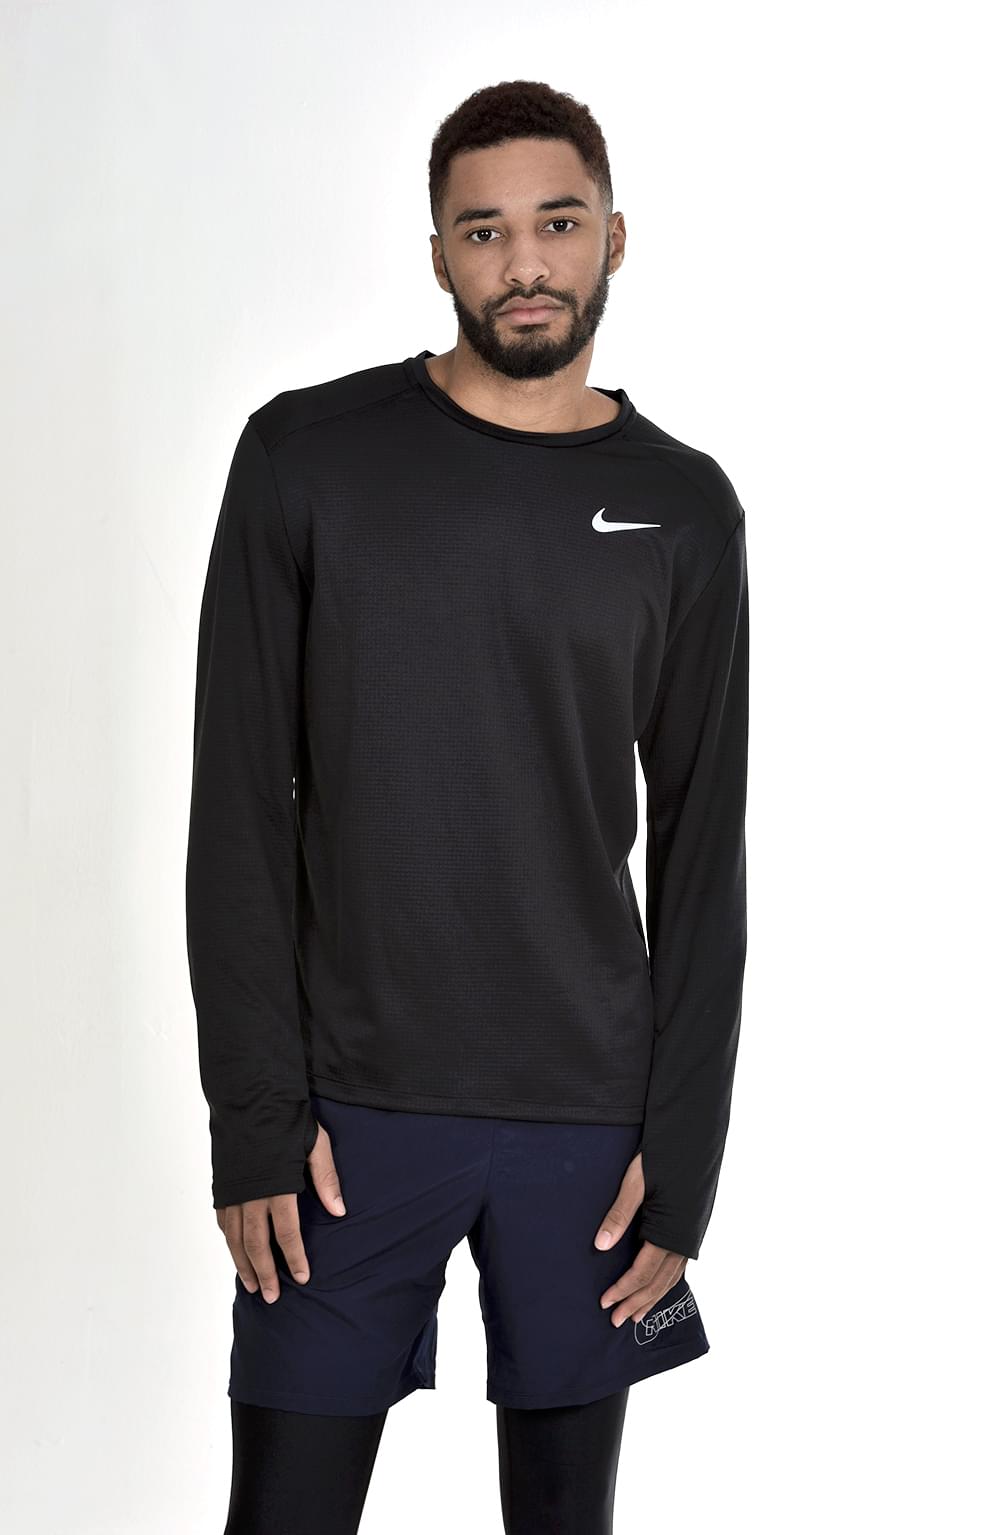 nike pacer top crew